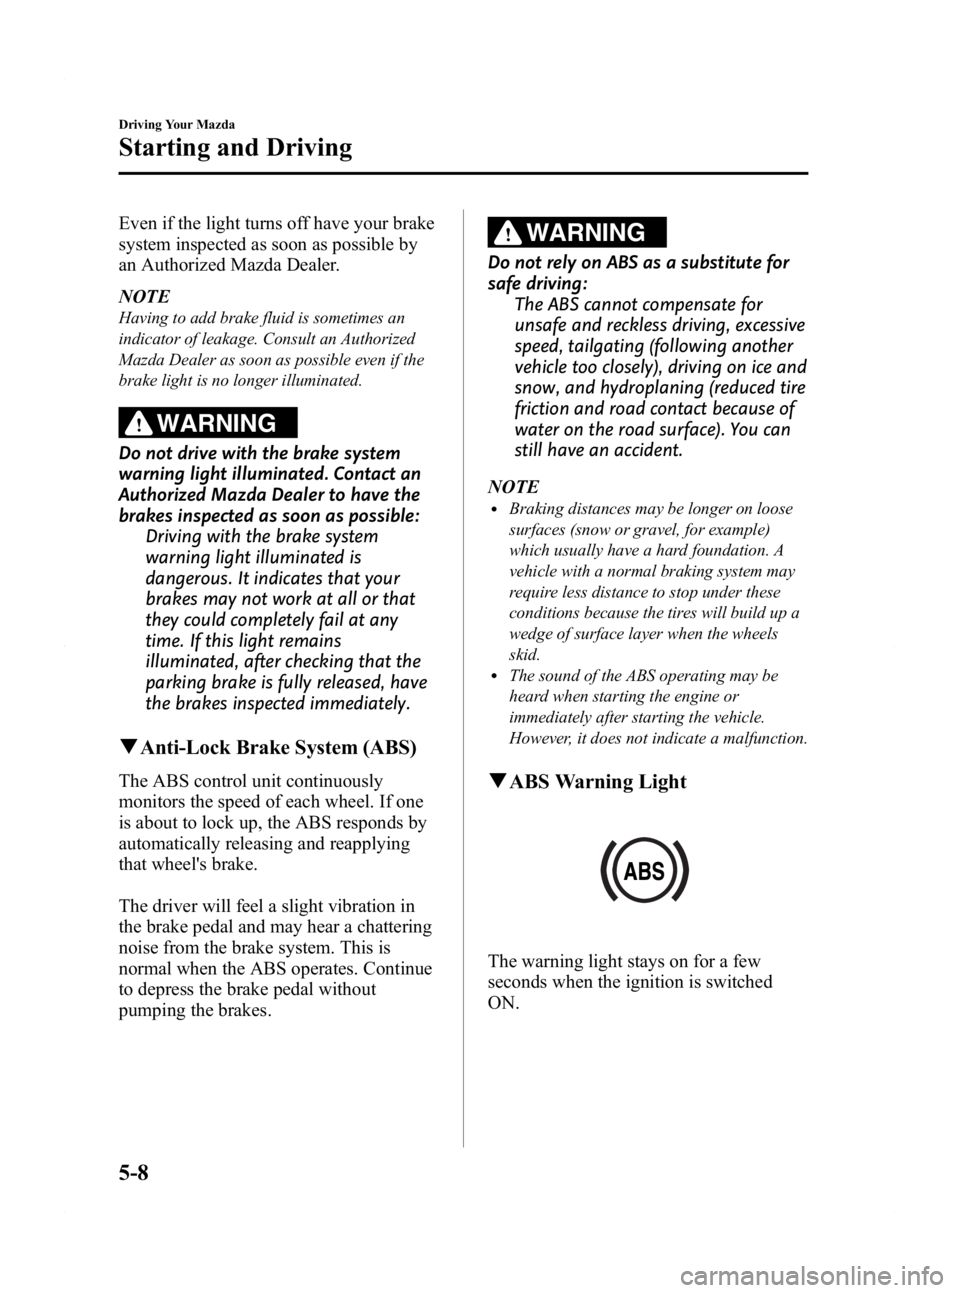 MAZDA MODEL 2 2011  Owners Manual Black plate (114,1)
Even if the light turns off have your brake
system inspected as soon as possible by
an Authorized Mazda Dealer.
NOTE
Having to add brake fluid is sometimes an
indicator of leakage.